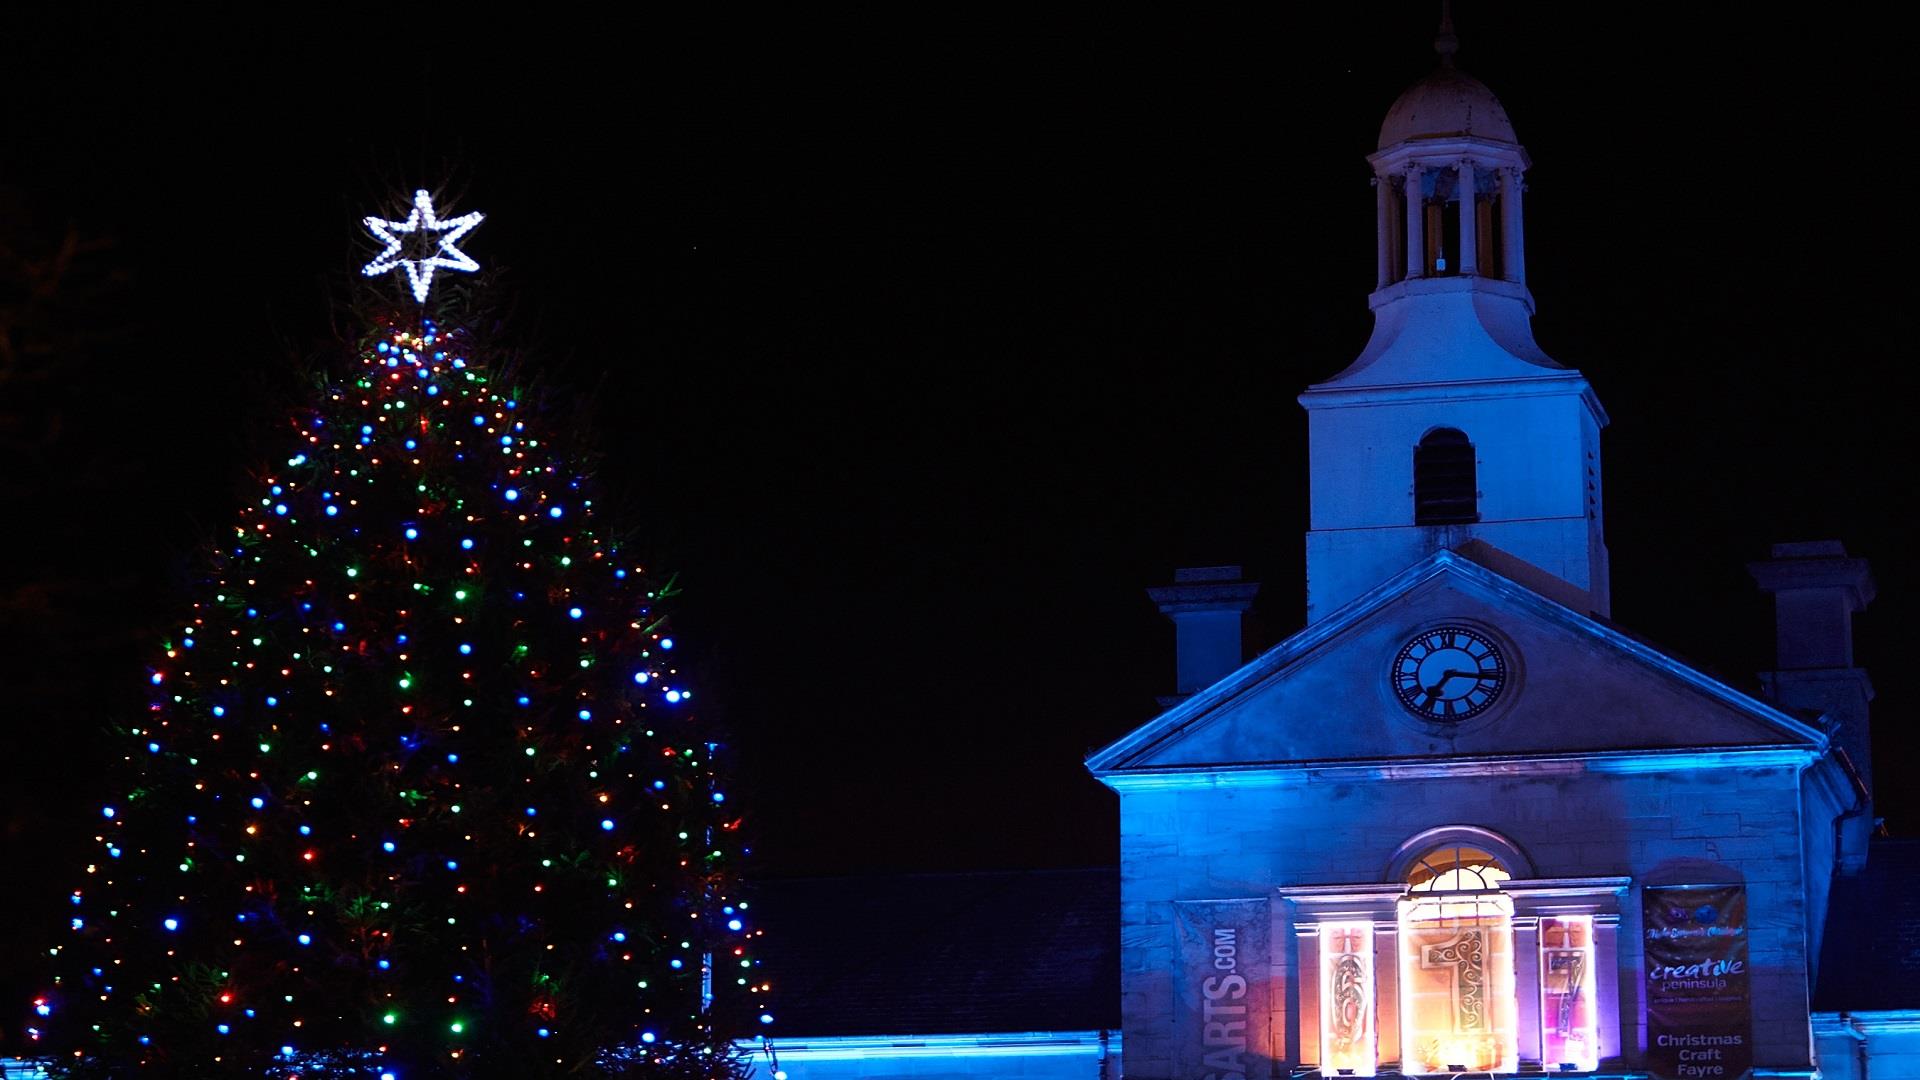 A photograph of Newtownards Christmas Tree lit at night with Ards Arts Centre in the backdrop